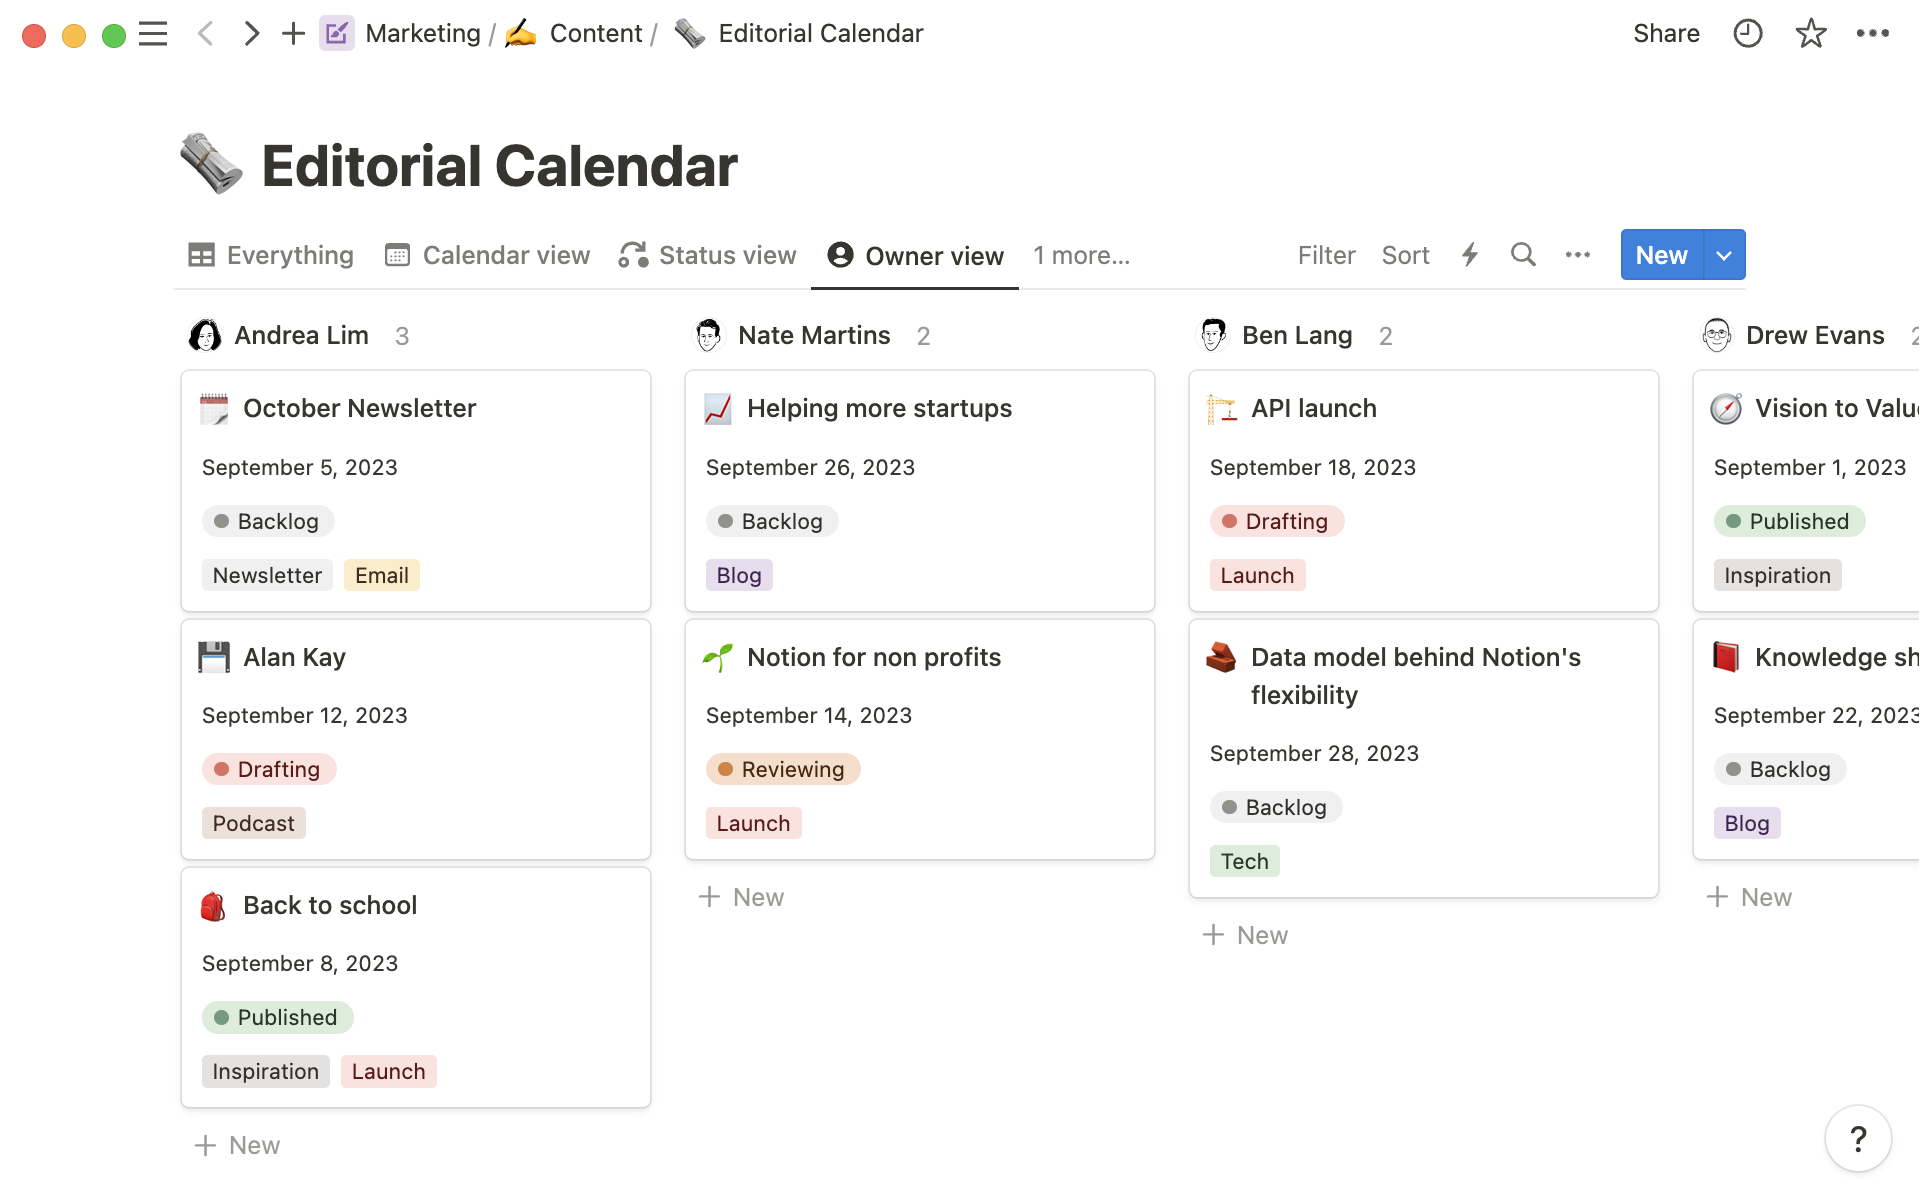 This view showing upcoming content organized by author helps the team keep a manageable workload.